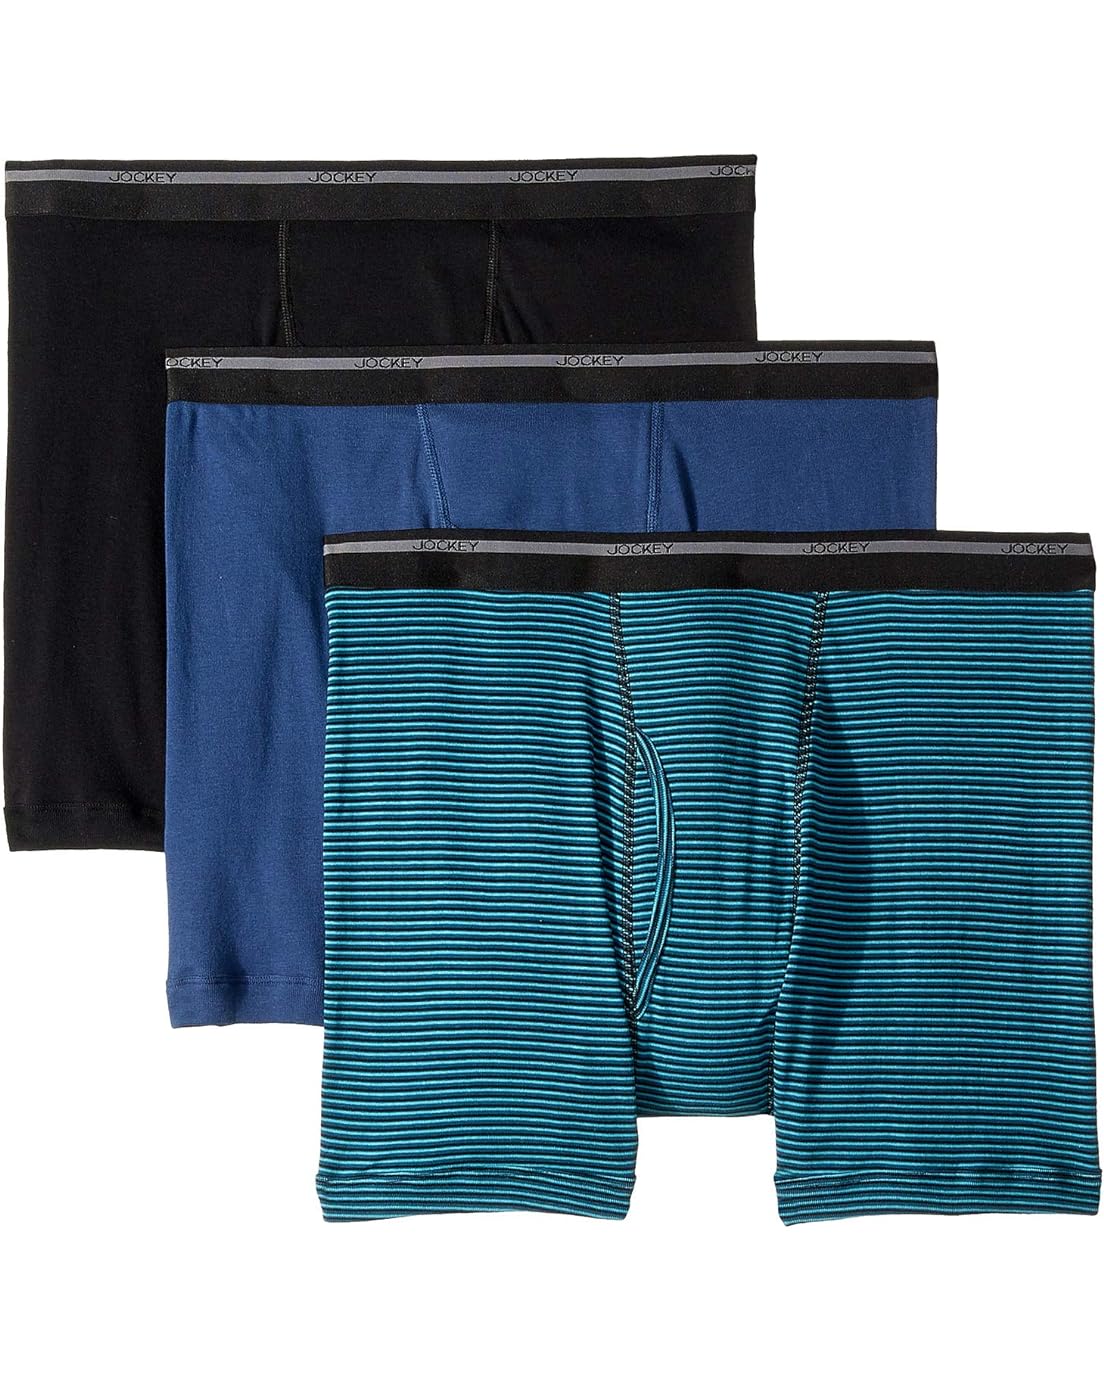  Jockey 100% Cotton Classic Knits Full Rise Boxer Brief 3-Pack